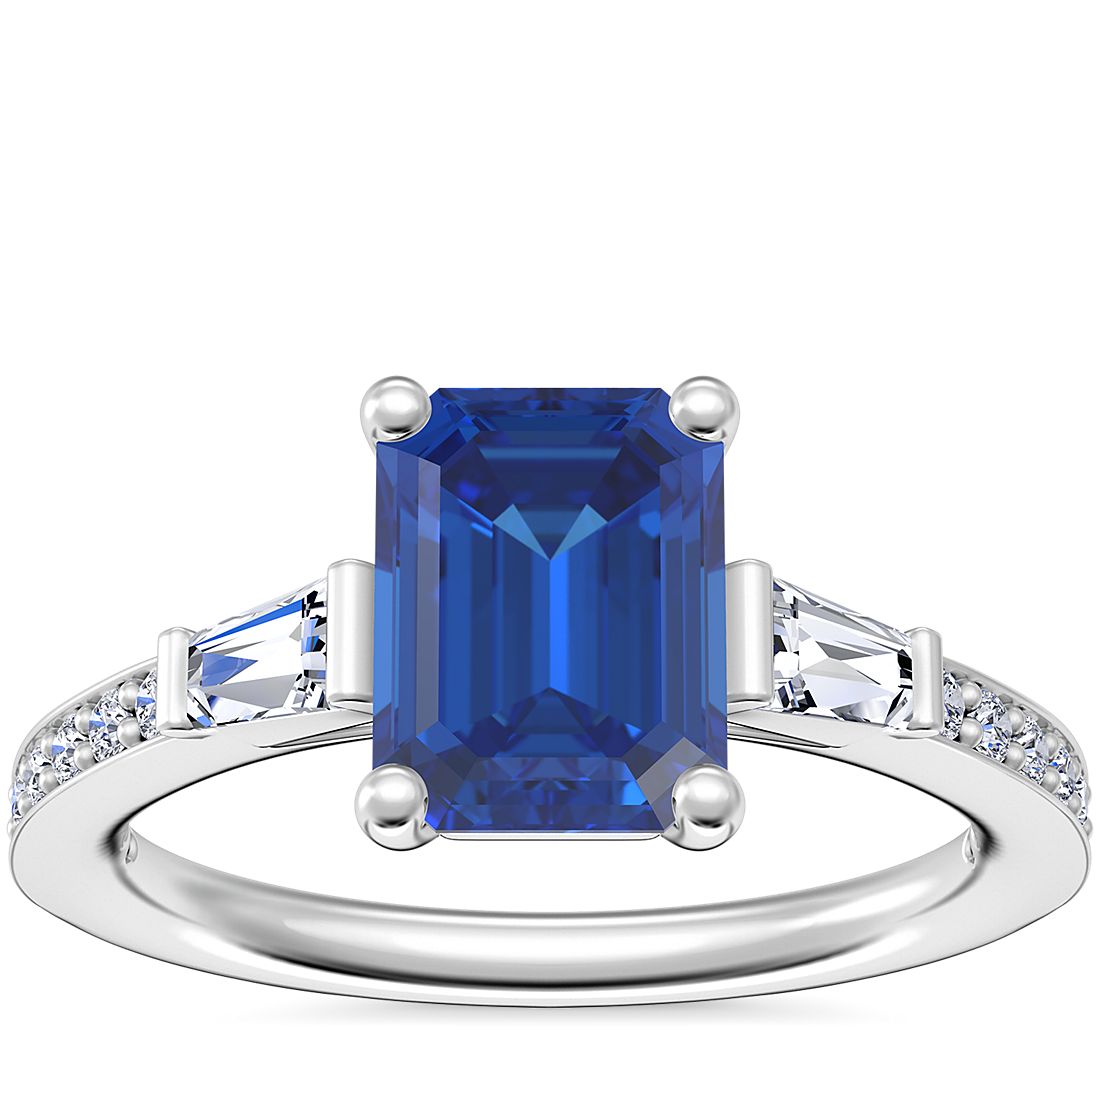 Tapered Baguette Diamond Cathedral Engagement Ring with Emerald-Cut Sapphire in Platinum (8x6mm)